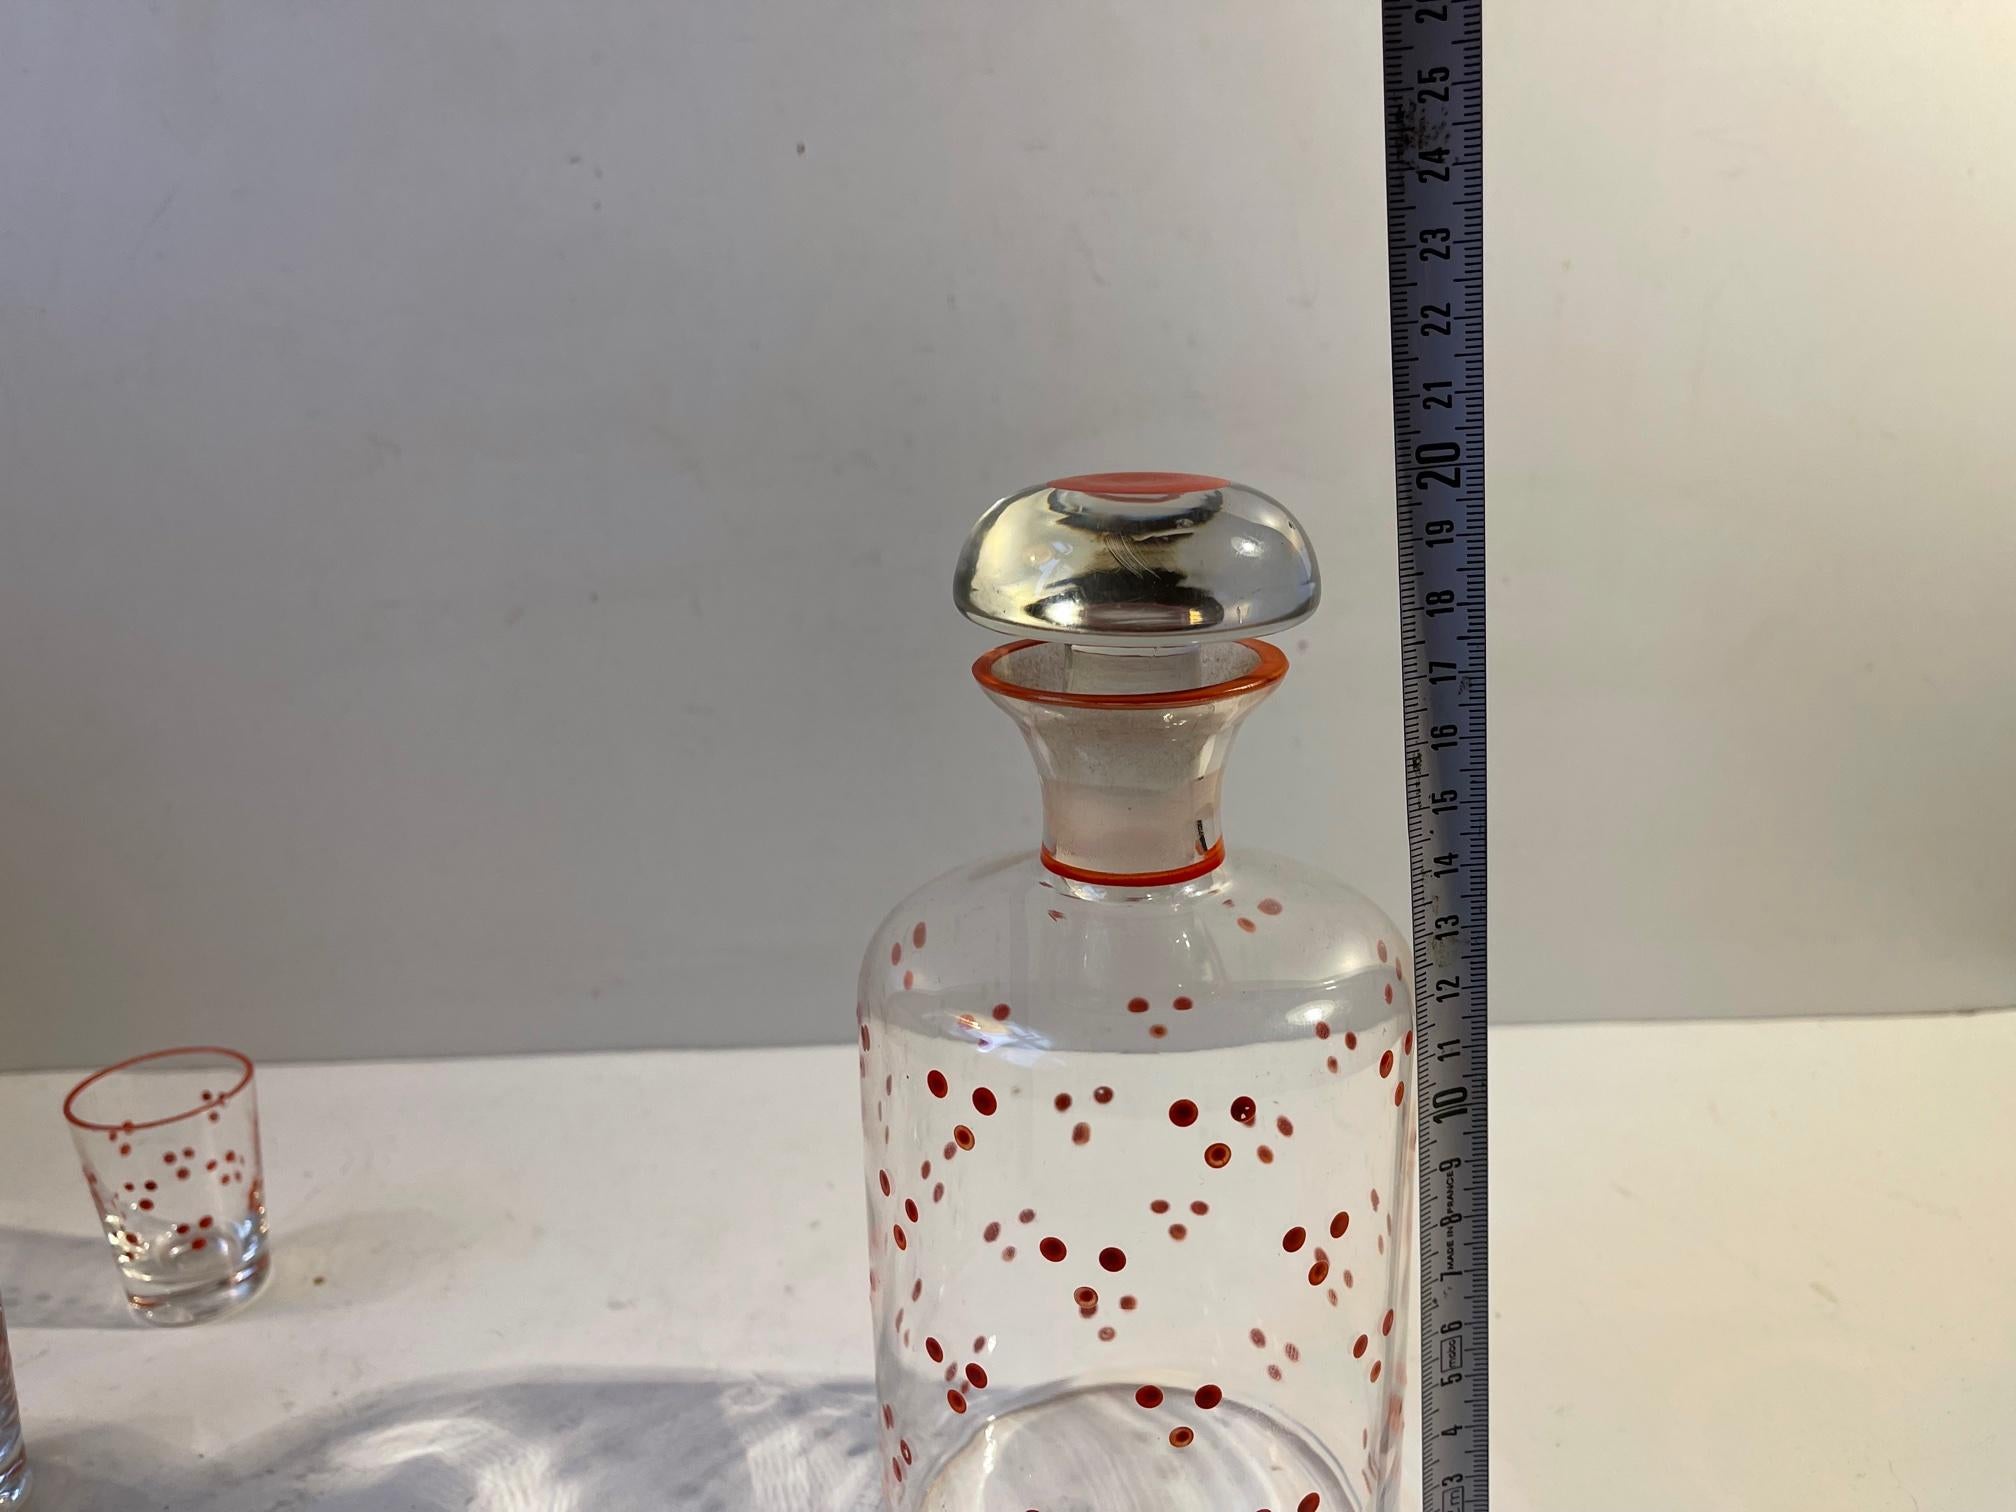 Decanter set catalogued as 'No Name' in the Holmegaard Catalogue from 1937. It was designed by Jacob Eiler Bang and features enamel dots applied by hand. The decanter is accompanied by 3 matching shot glasses. The fourth glass that will come along